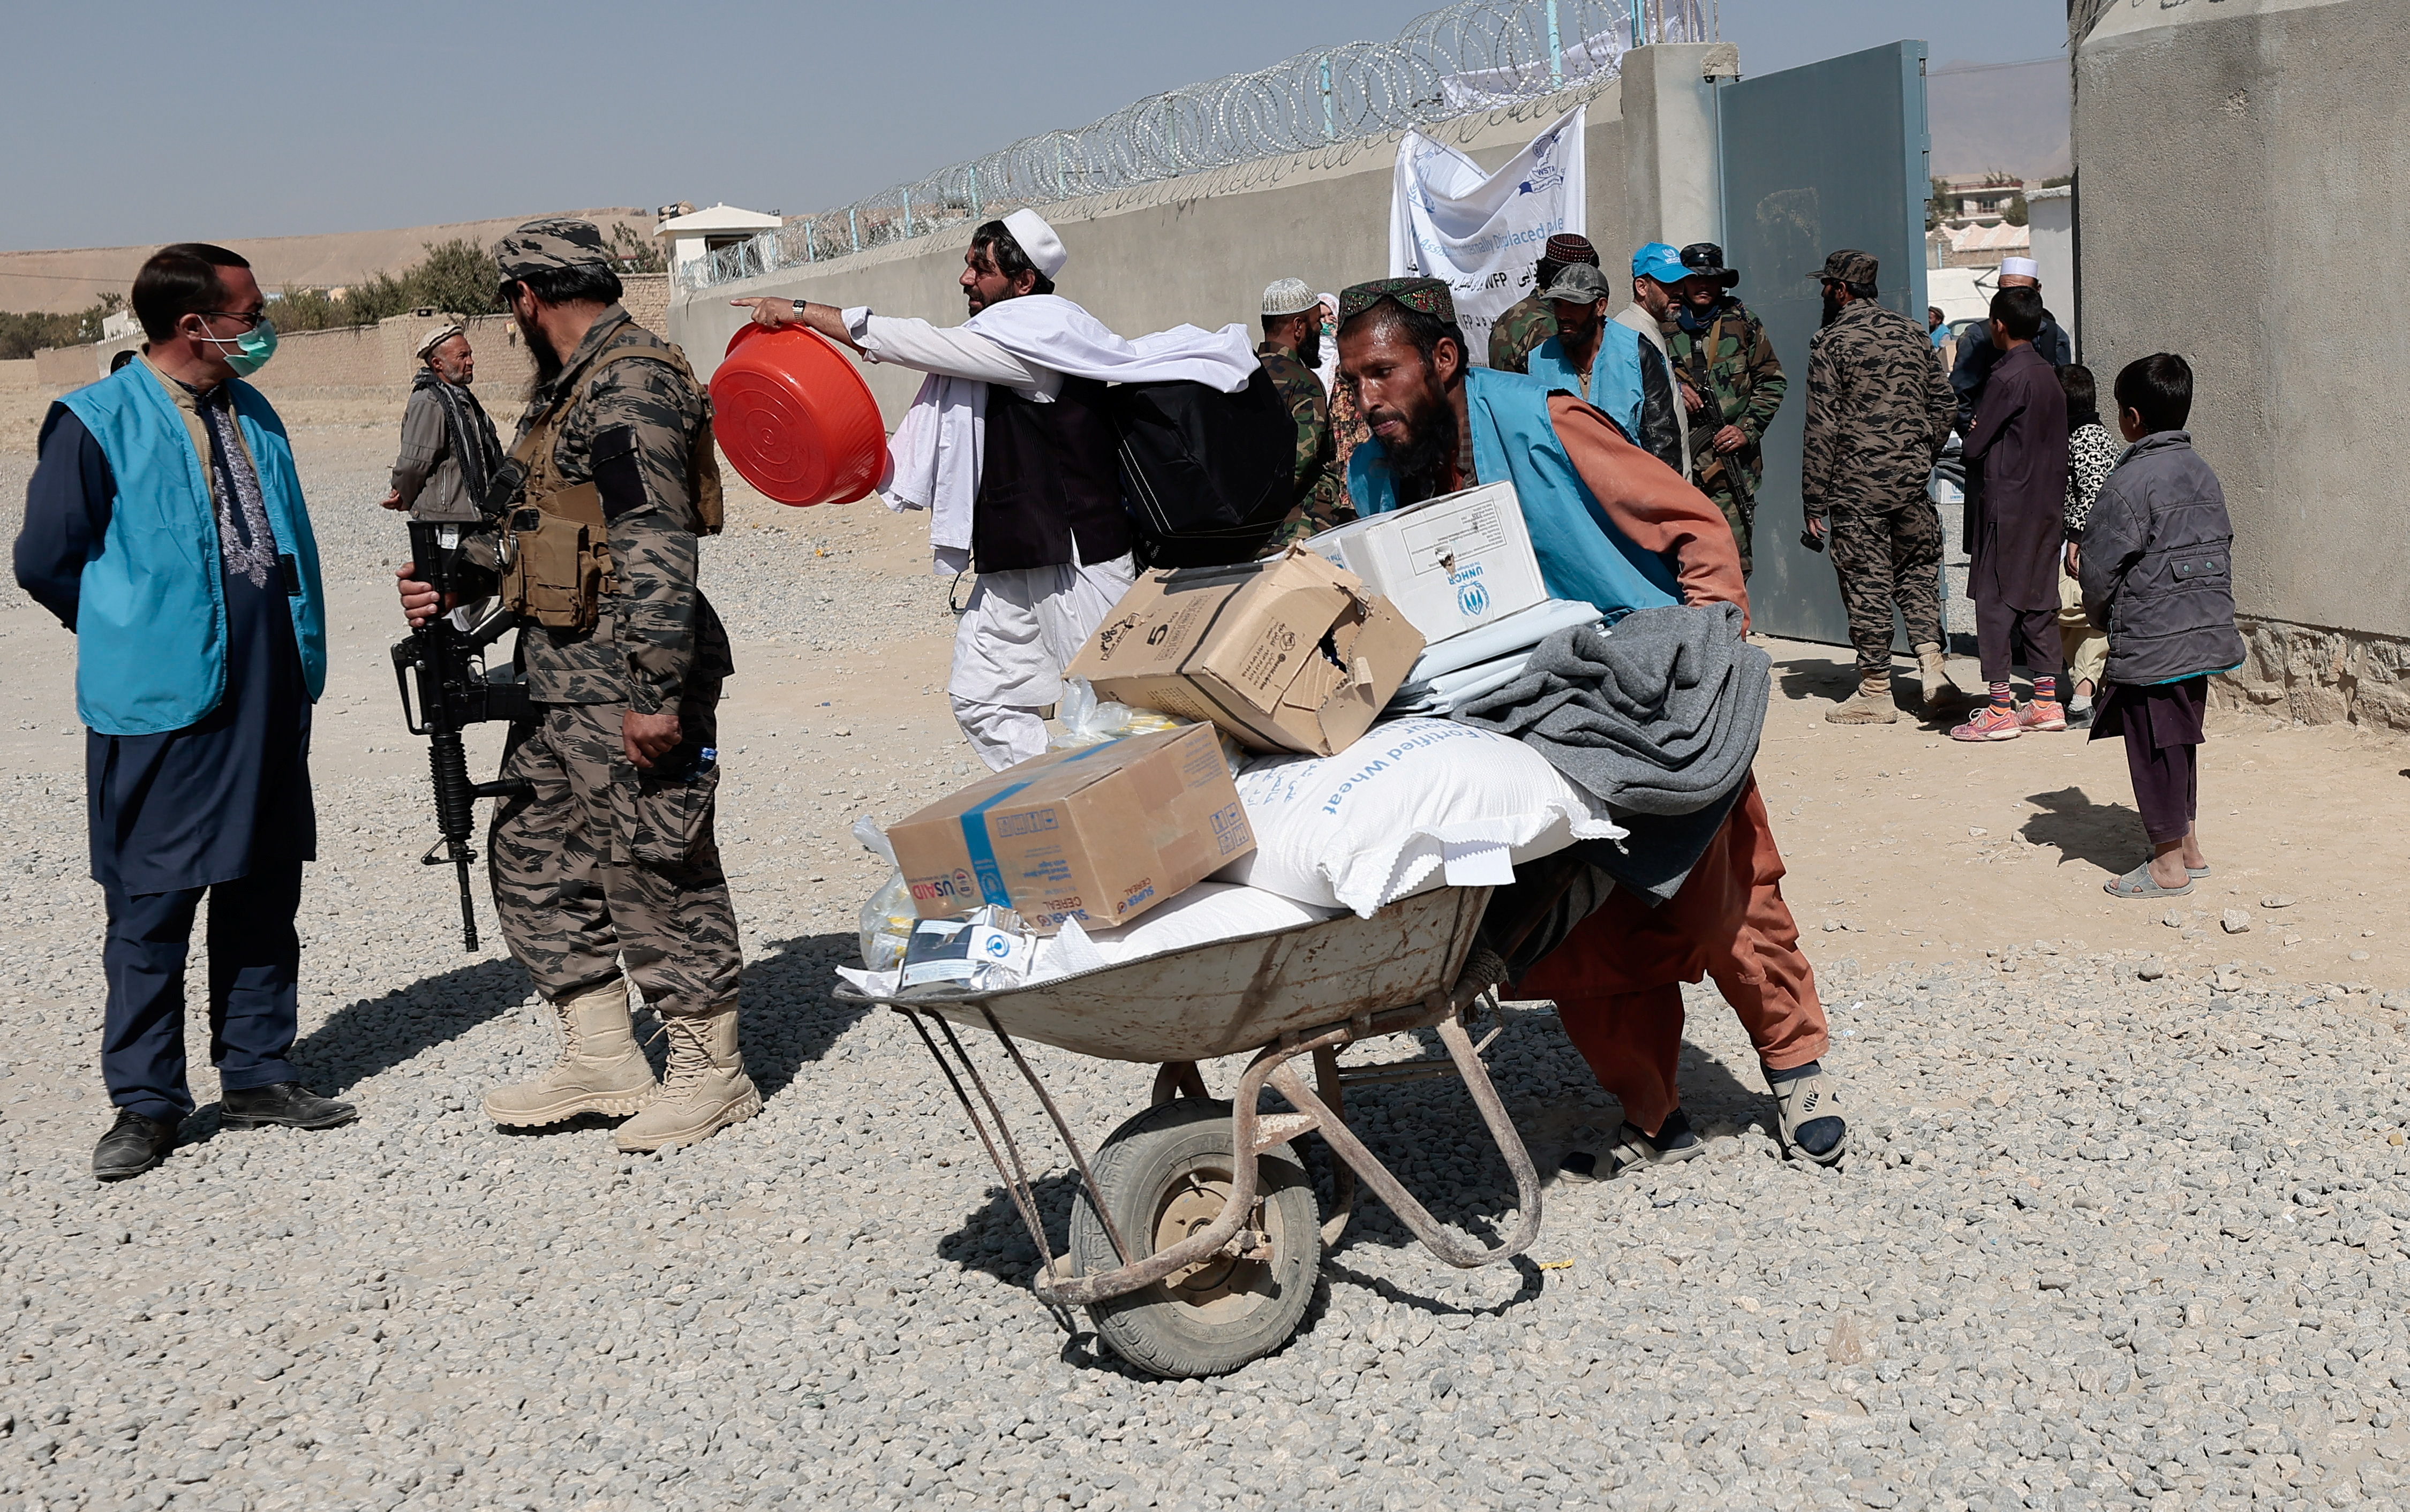 UNHCR worker pushes a wheelbarrow loaded with aid supplies for a displaced Afghan family outside the distribution center on the outskirts of Kabul